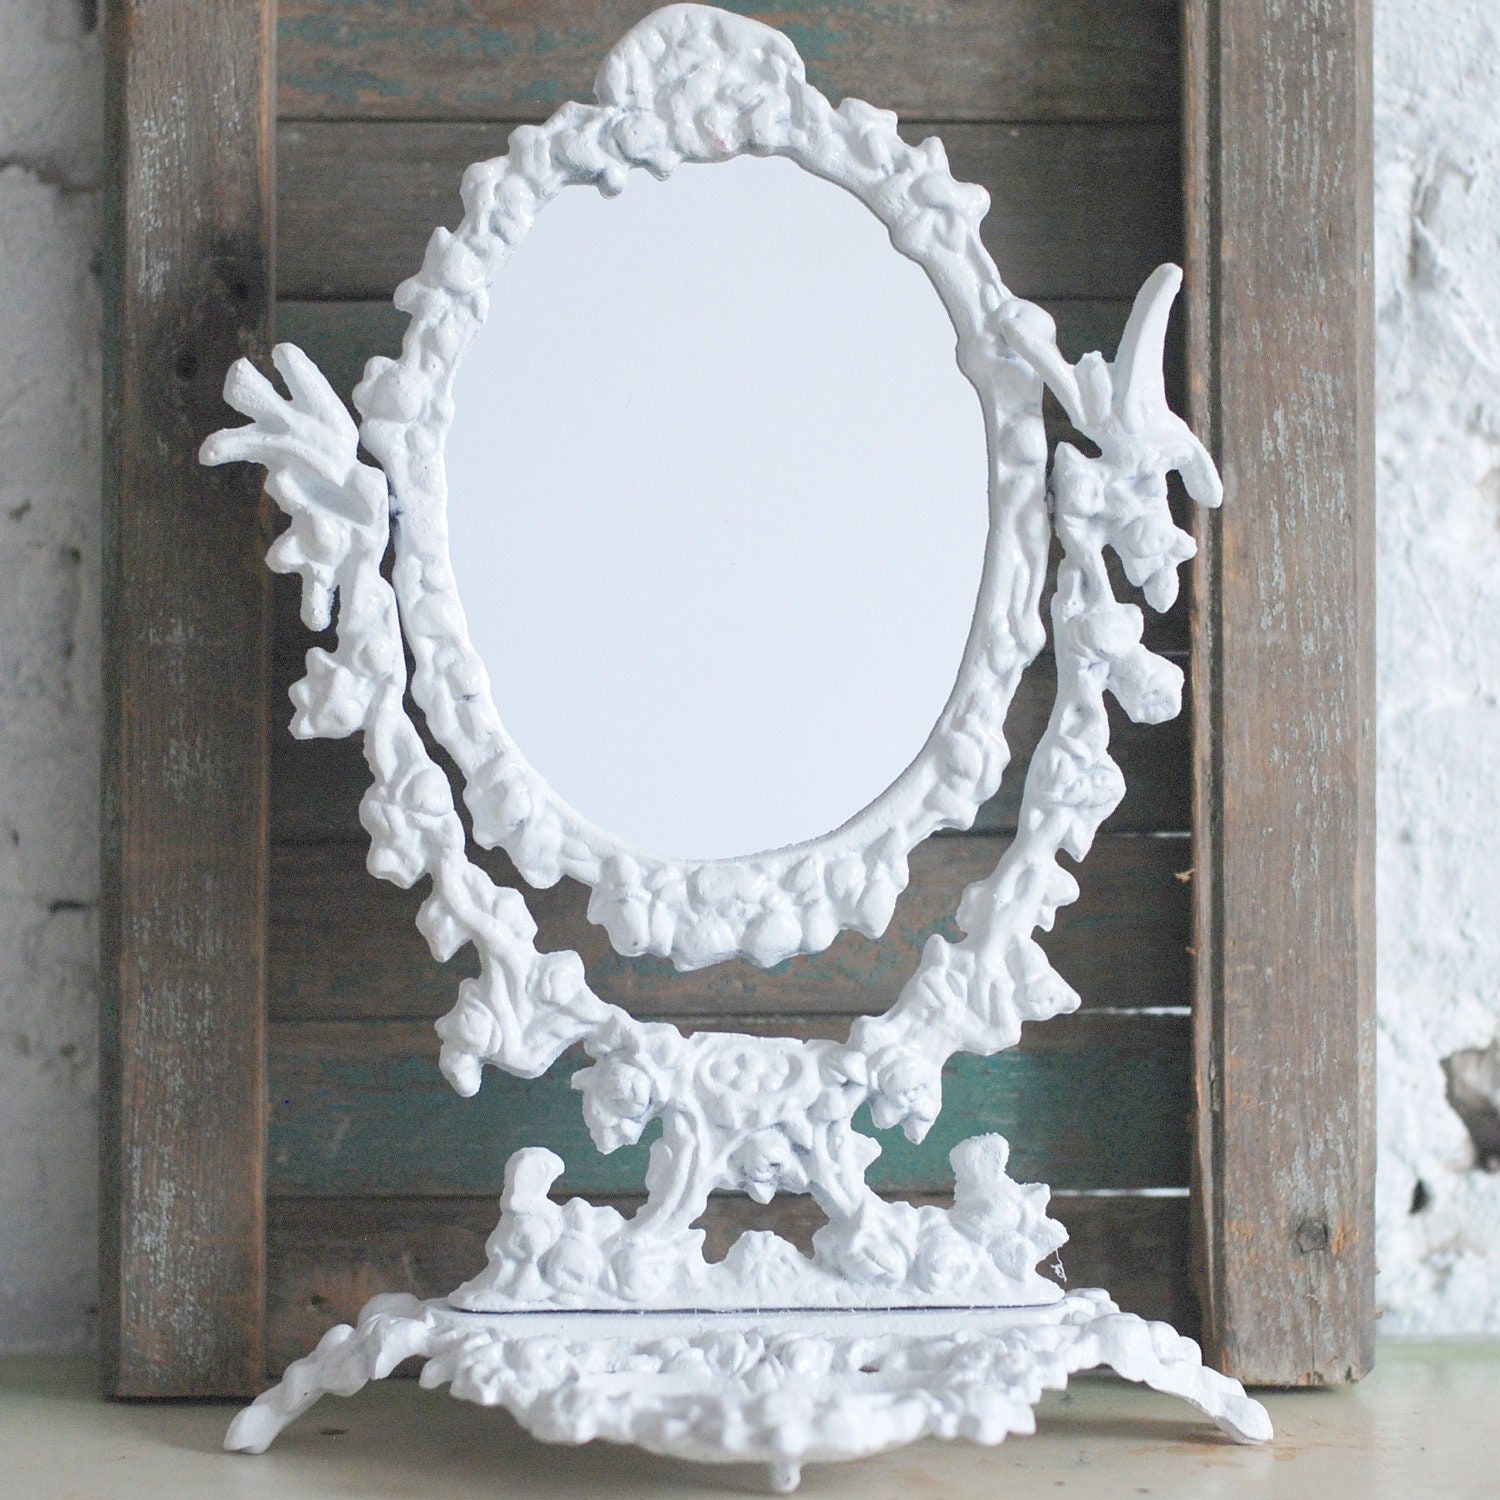 Antique Ornate Metal Pedestal Mirror / Stand Alone Frame Intended For Antique Brass Standing Mirrors (View 2 of 15)